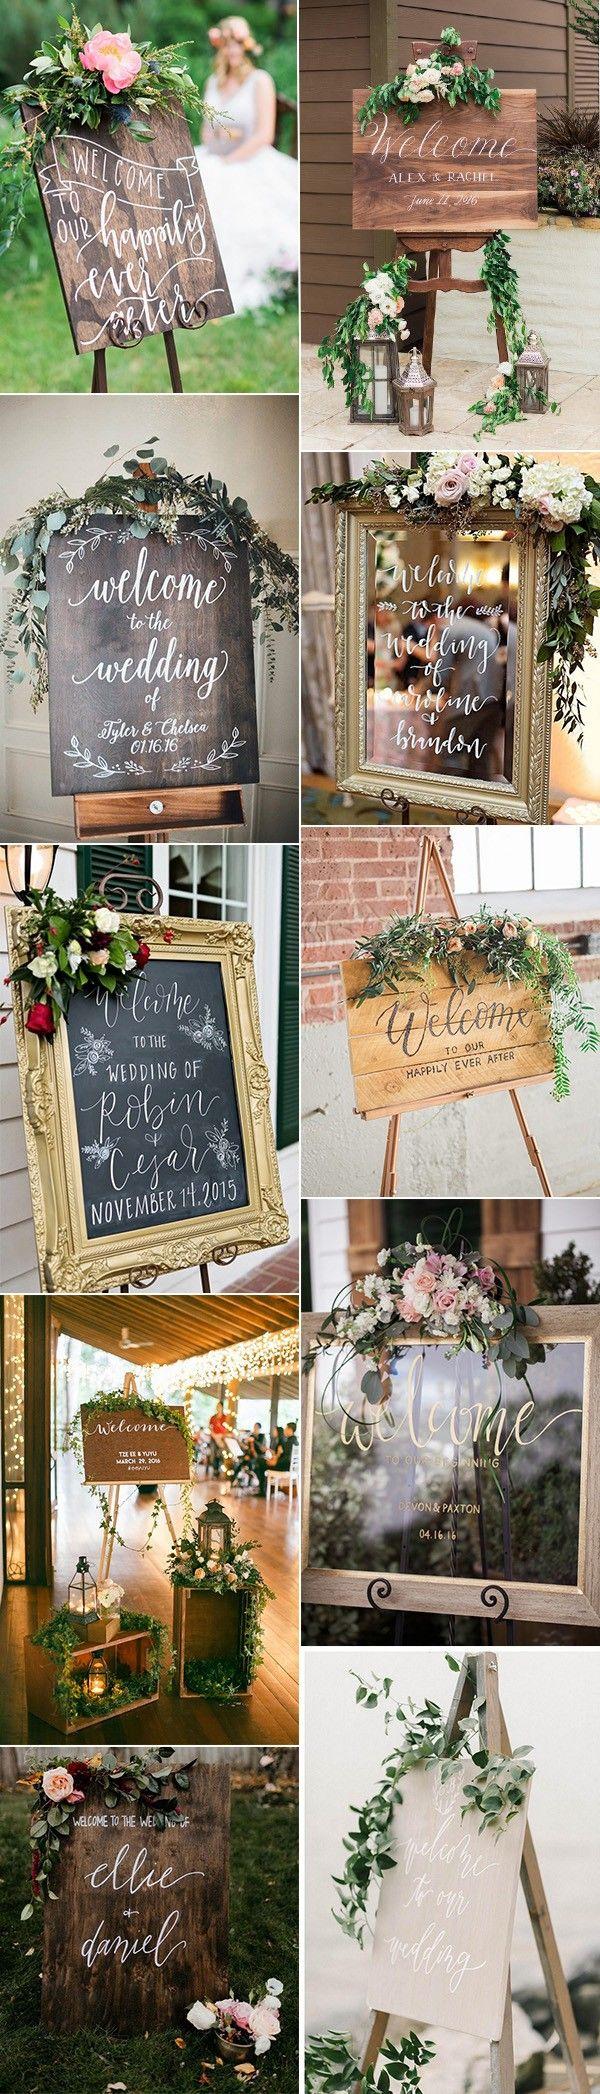 Wedding - 20 Brilliant Wedding Welcome Sign Ideas For Ceremony And Reception